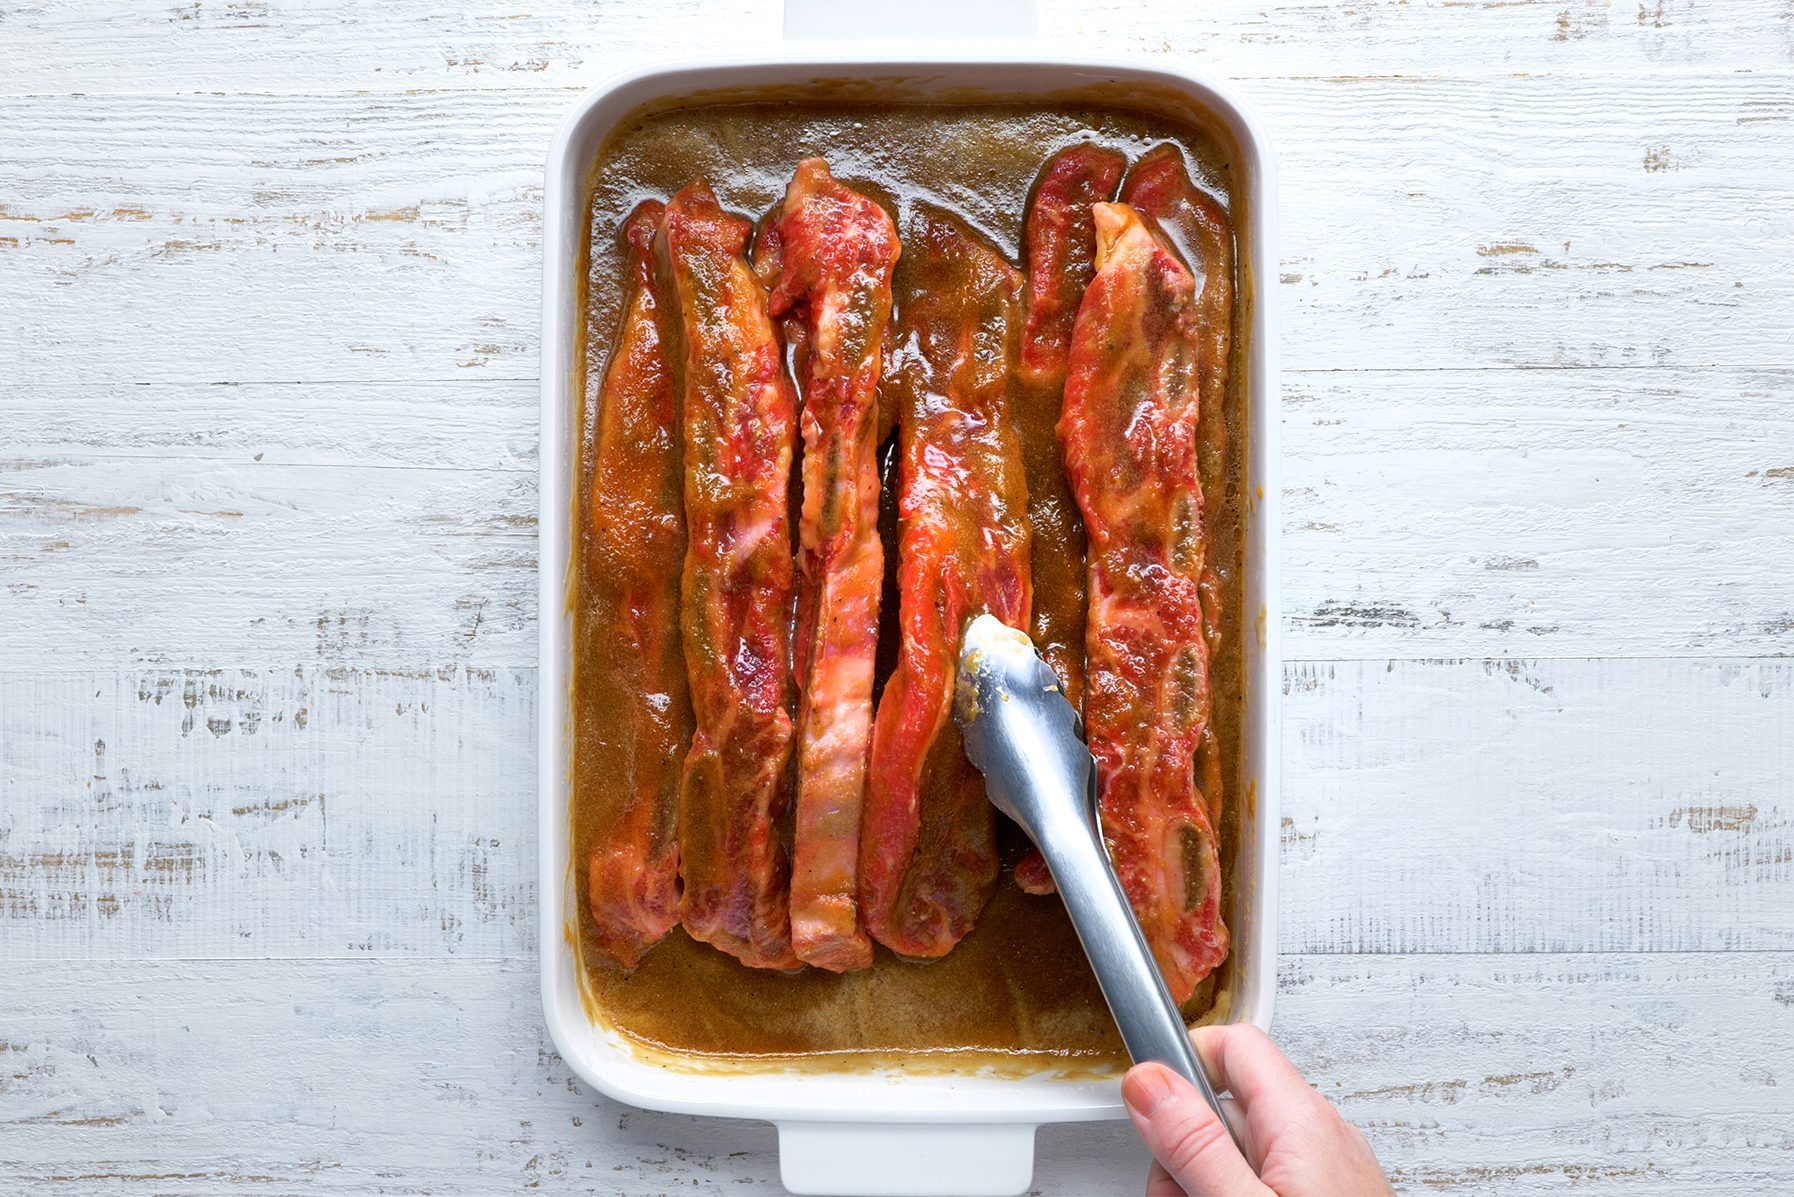 A hand uses tongs to place ribs in a white baking dish with a brown sauce. The dish is on a rustic white wooden surface. 